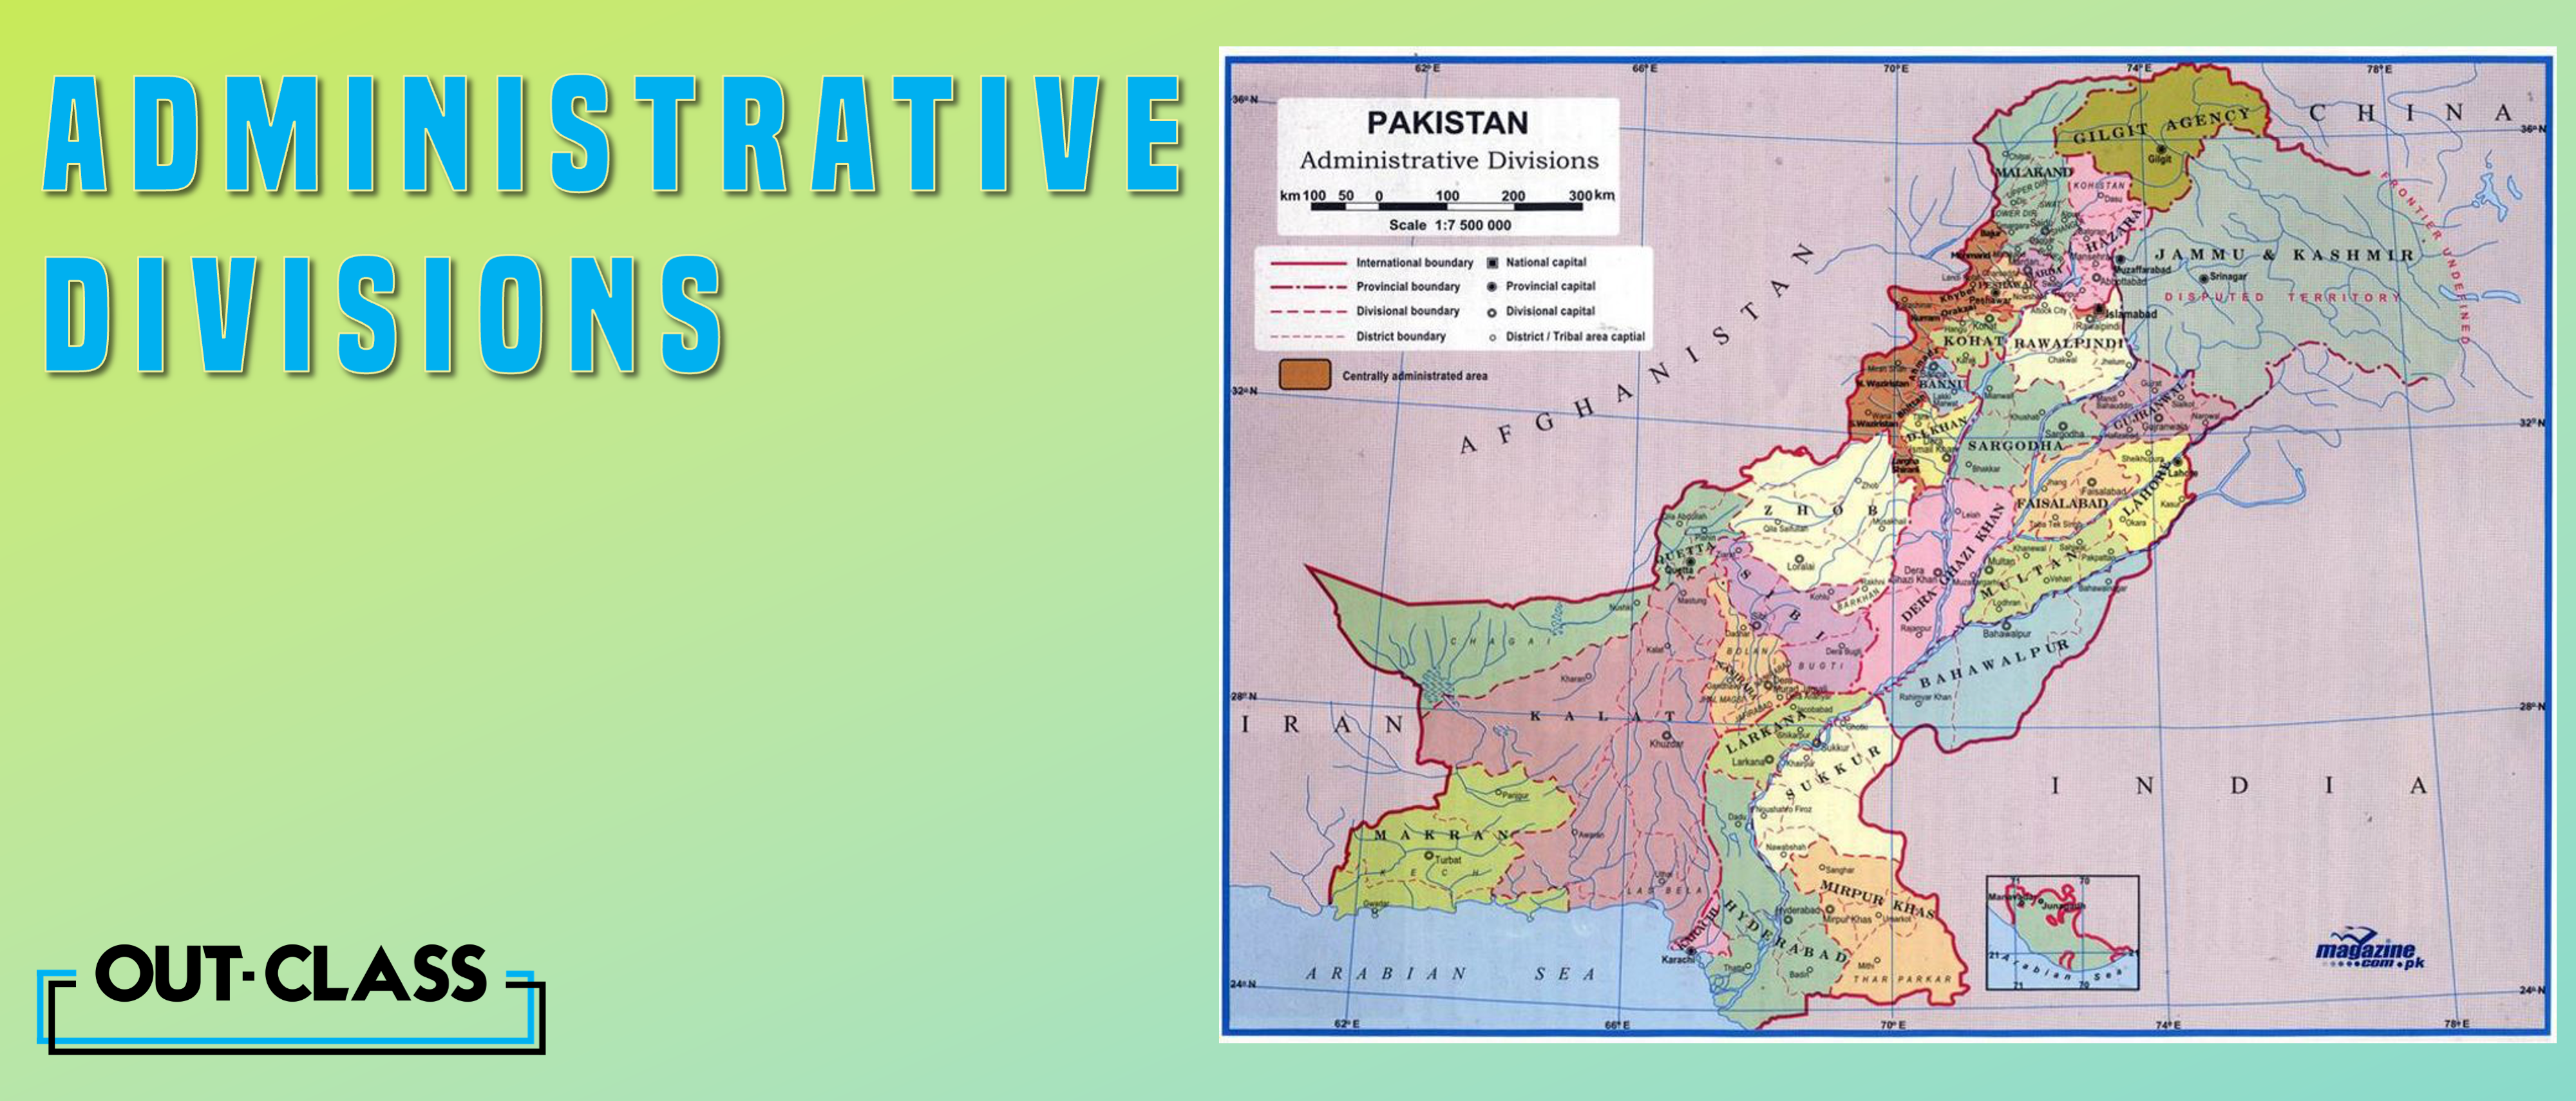 It illustrates the map of Pakistan and shows the administrative divisions and regions of Pakistan. It explores exploring its provinces, federal territories, and disputed regions. And gives insights into the governance structure and unique characteristics of Punjab, Sindh, Khyber Pakhtunkhwa, and Balochistan. 